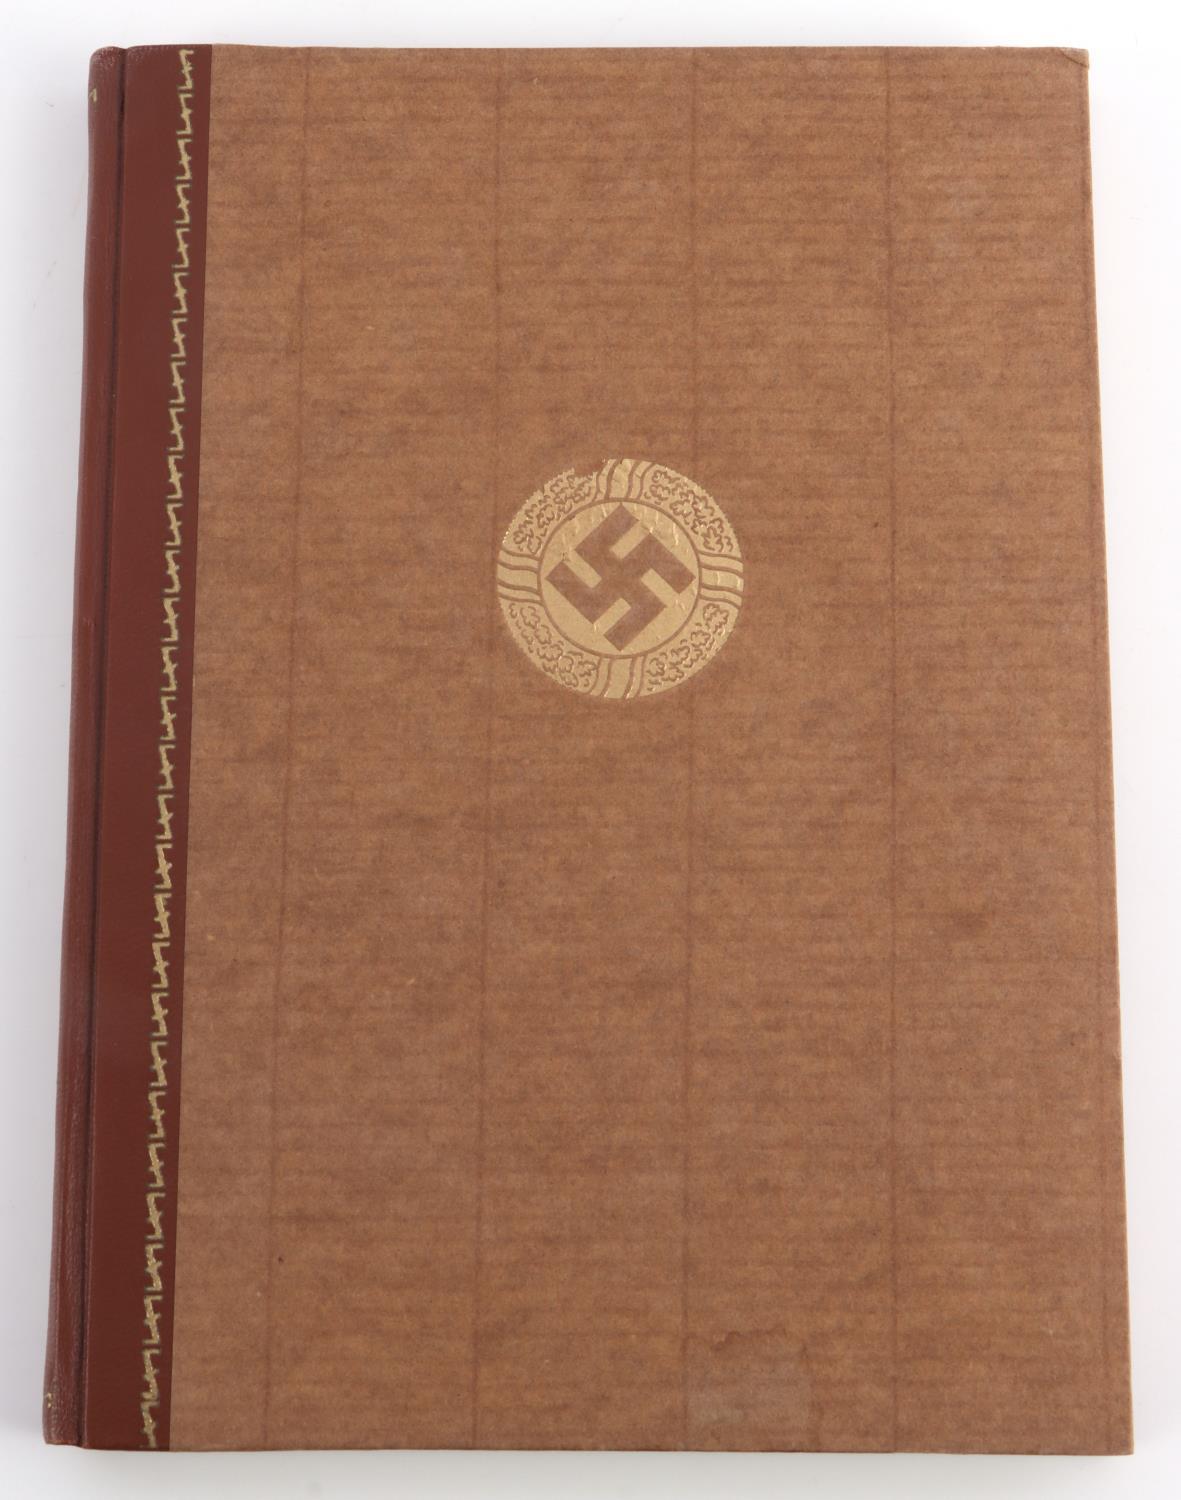 NATIONAL SOCIALISM IN NEW GERMANY & BOLSHEVIC BOOK